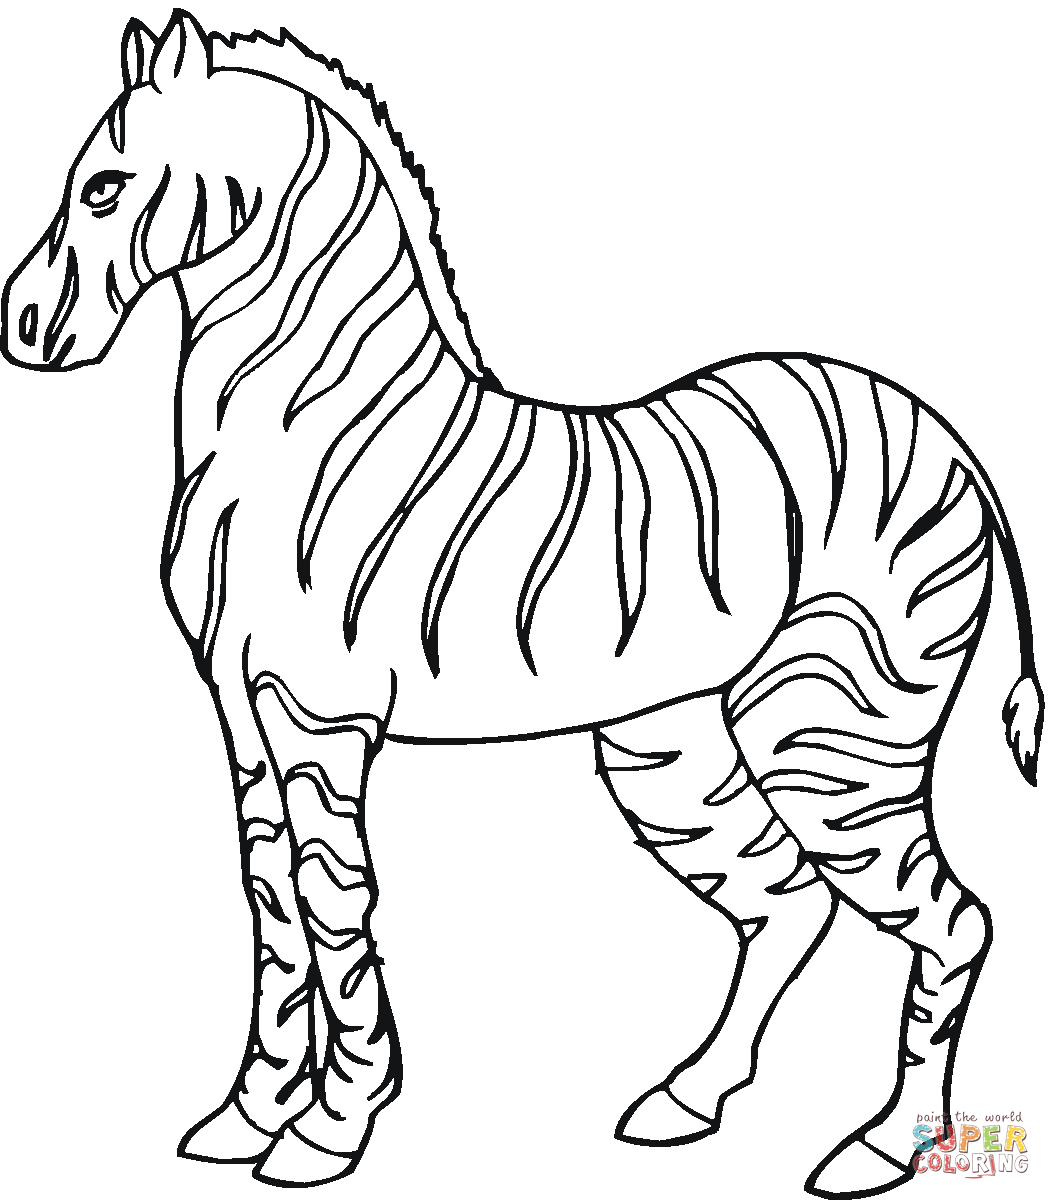 colouring picture of zebra zebras coloring pages free coloring pages zebra zebra colouring picture of 